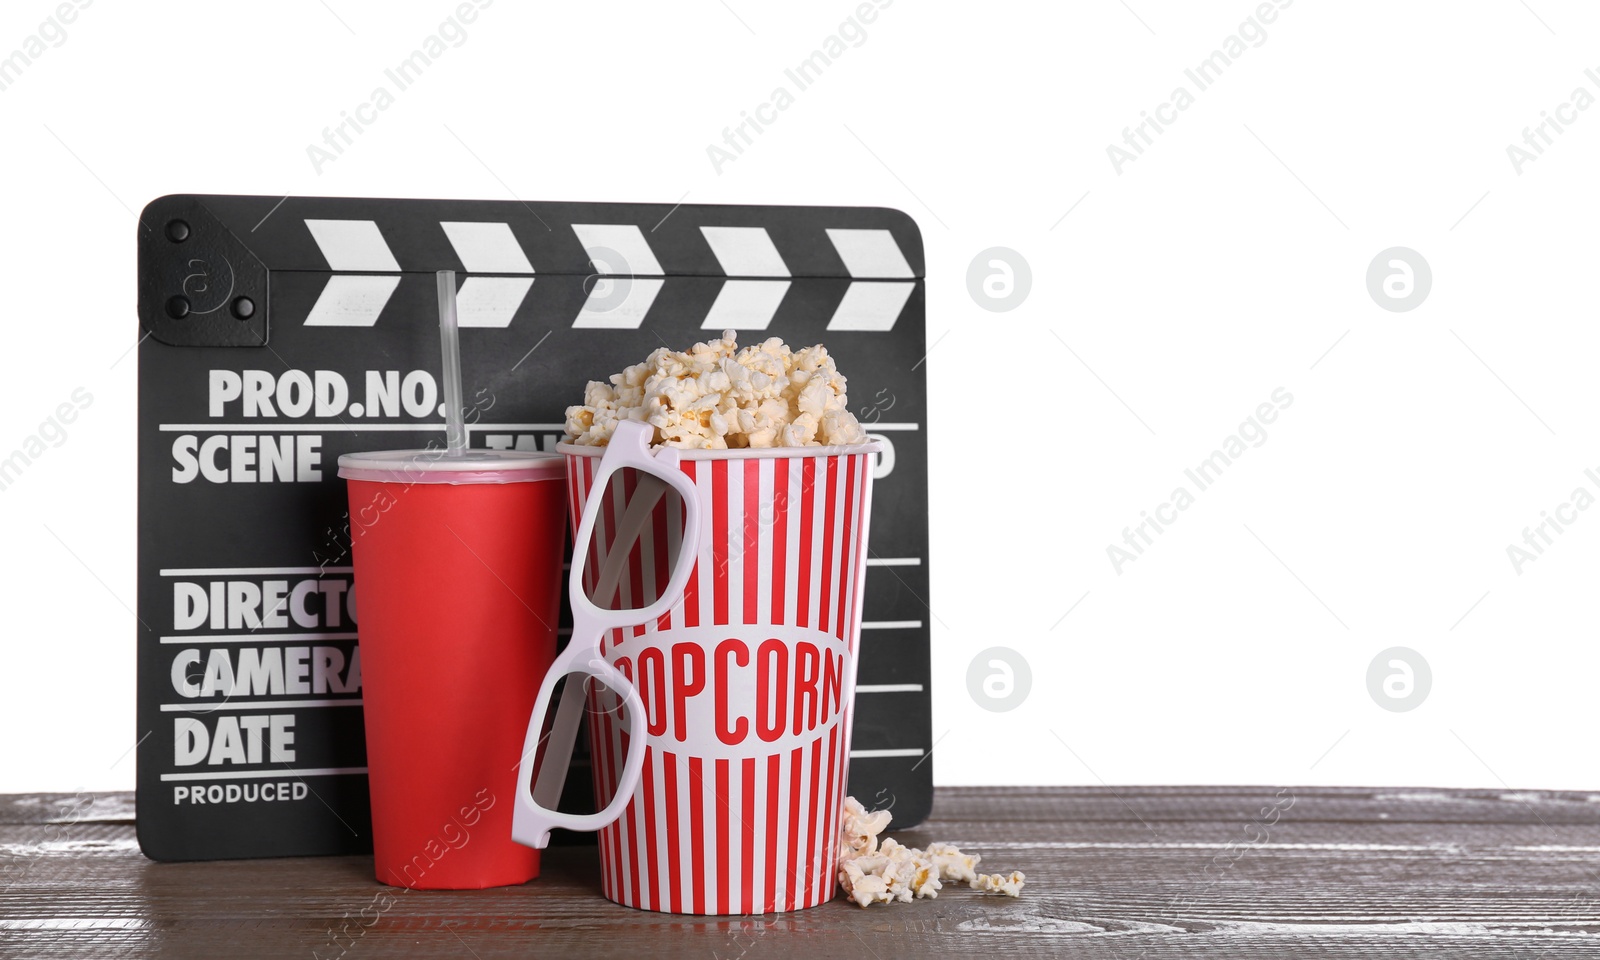 Photo of Delicious popcorn, drink, 3D glasses and clapperboard on wooden table against white background